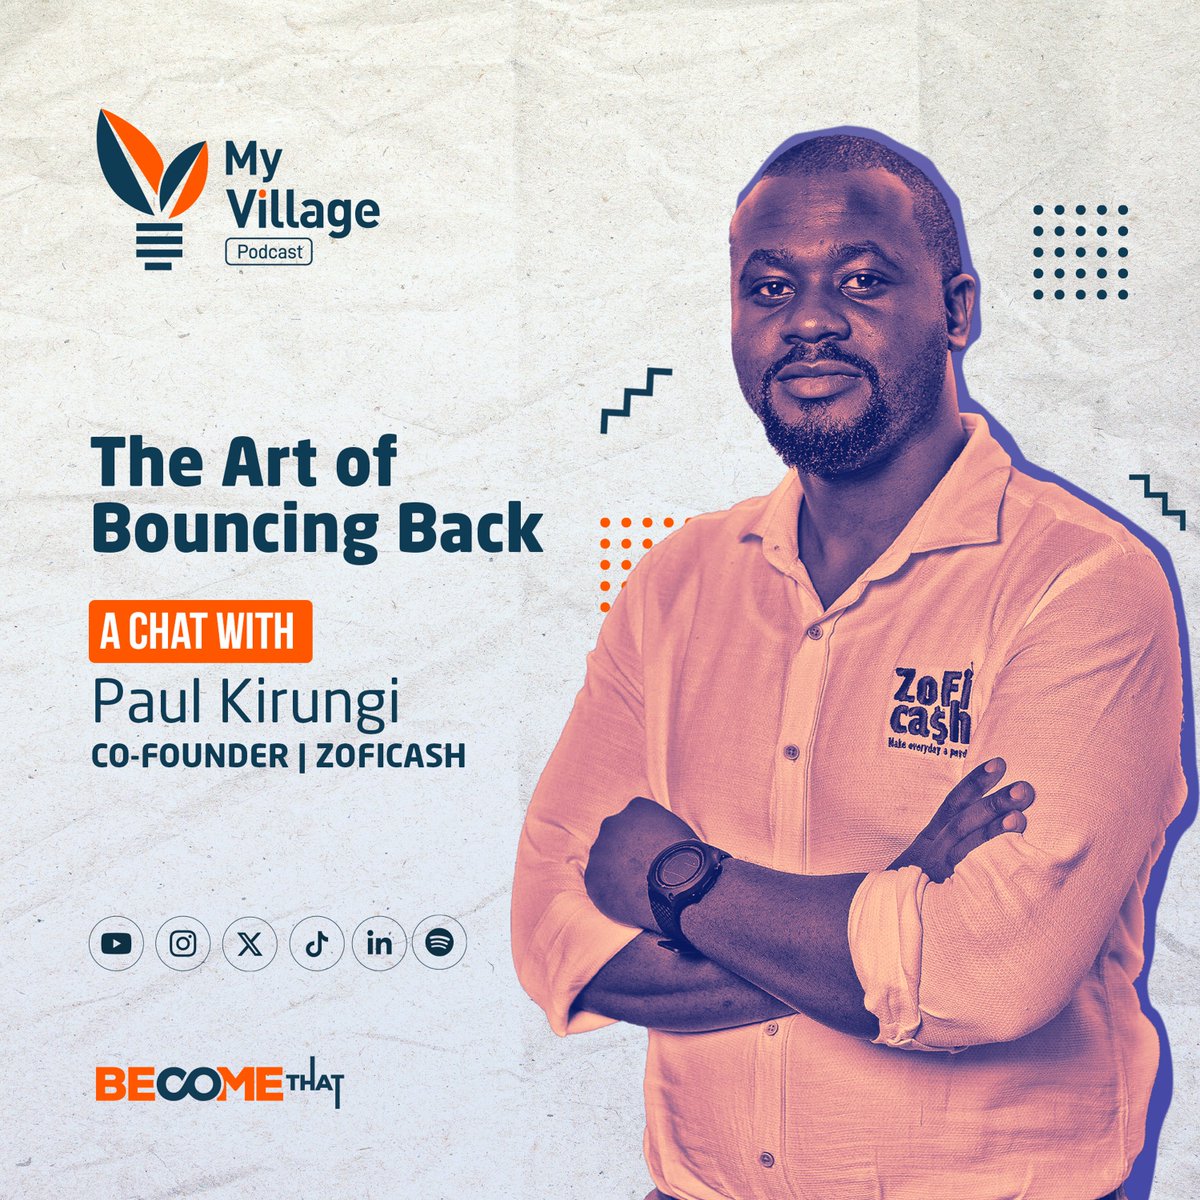 Catch here an inspiring story of @KirungiPaul as he shares the remarkable journey of @ZofiCash and their game-changing approach to personal finance through innovative salary advance solutions! Watch it now 👉bit.ly/3QcZxLc